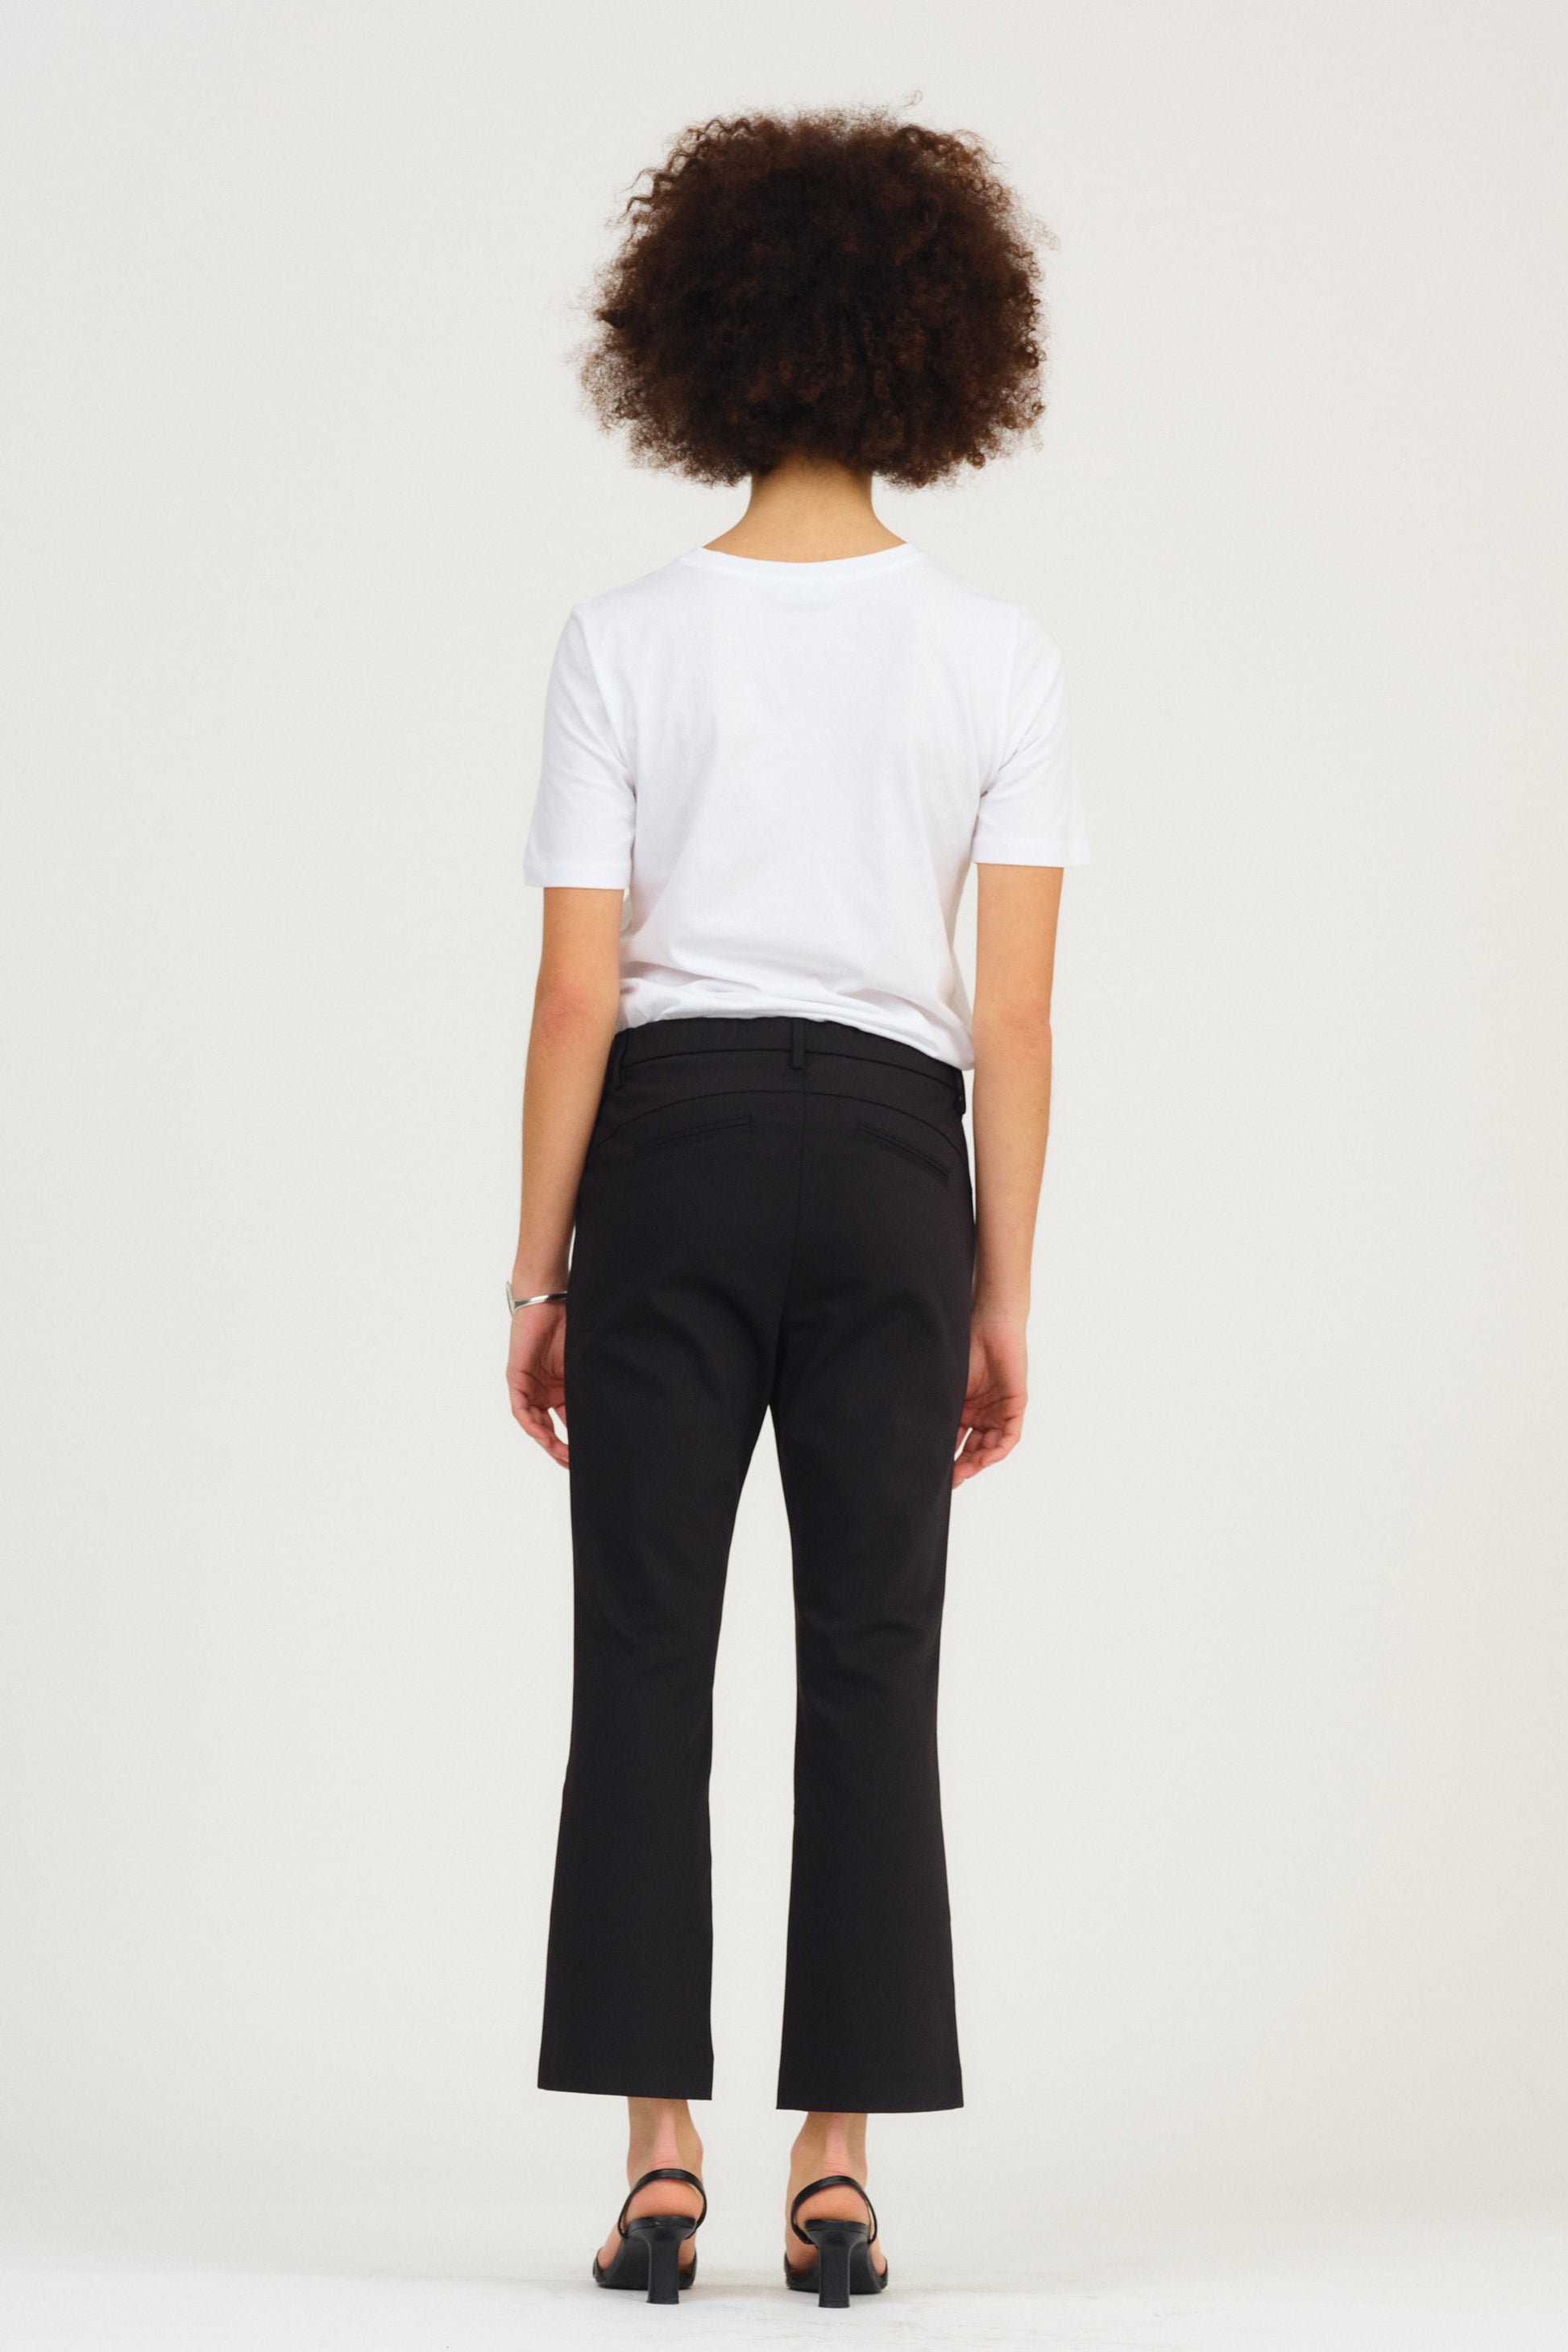 IVY-Alice Cropped Flare Pant - Black